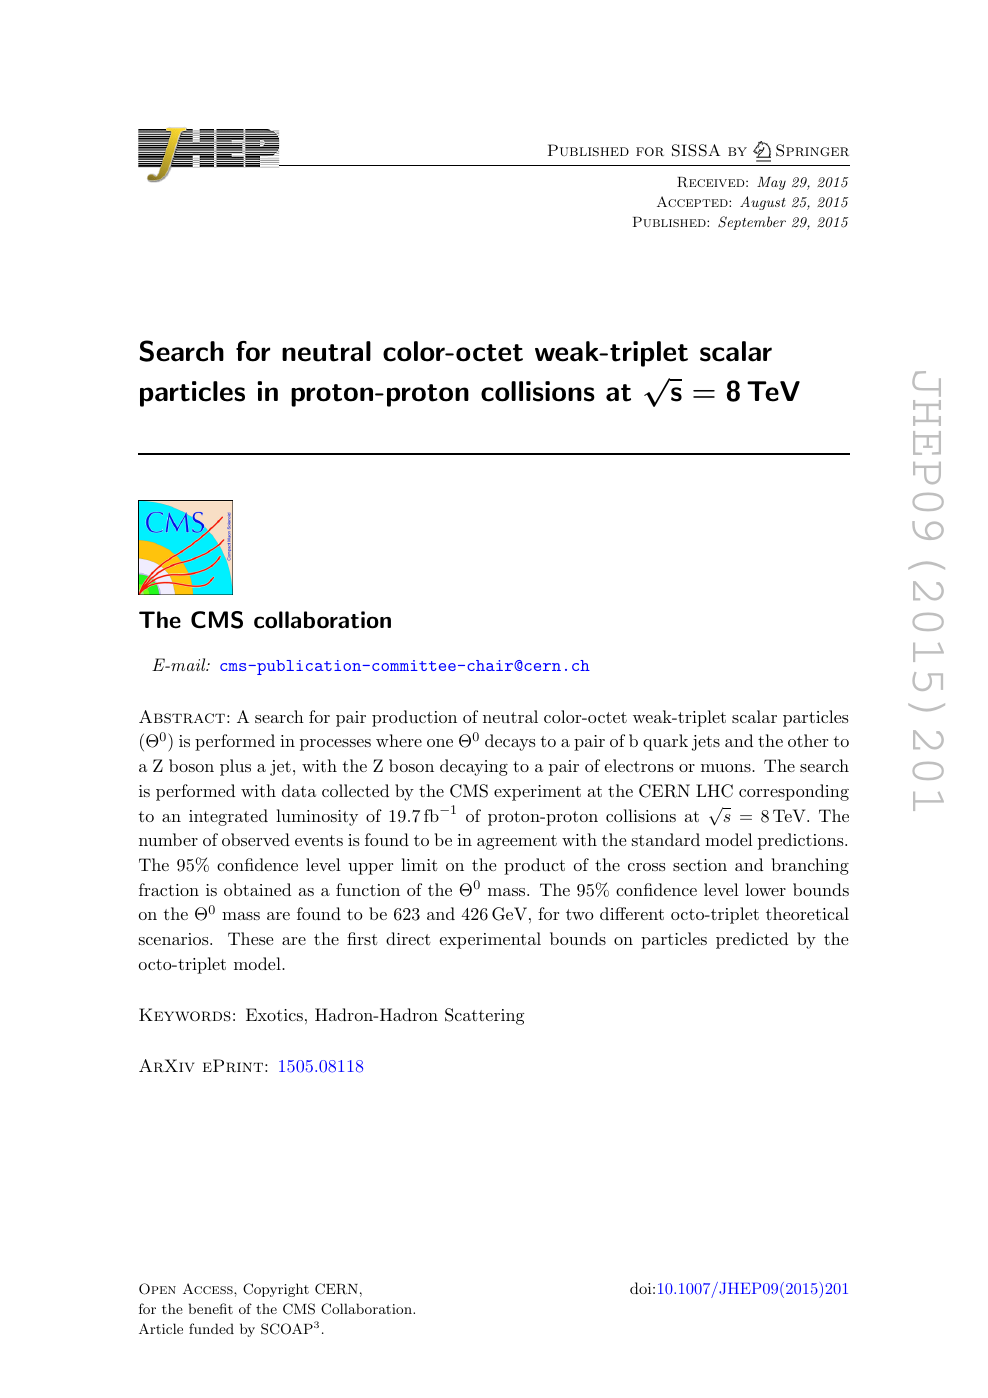 Search for neutral color-octet weak-triplet scalar particles in